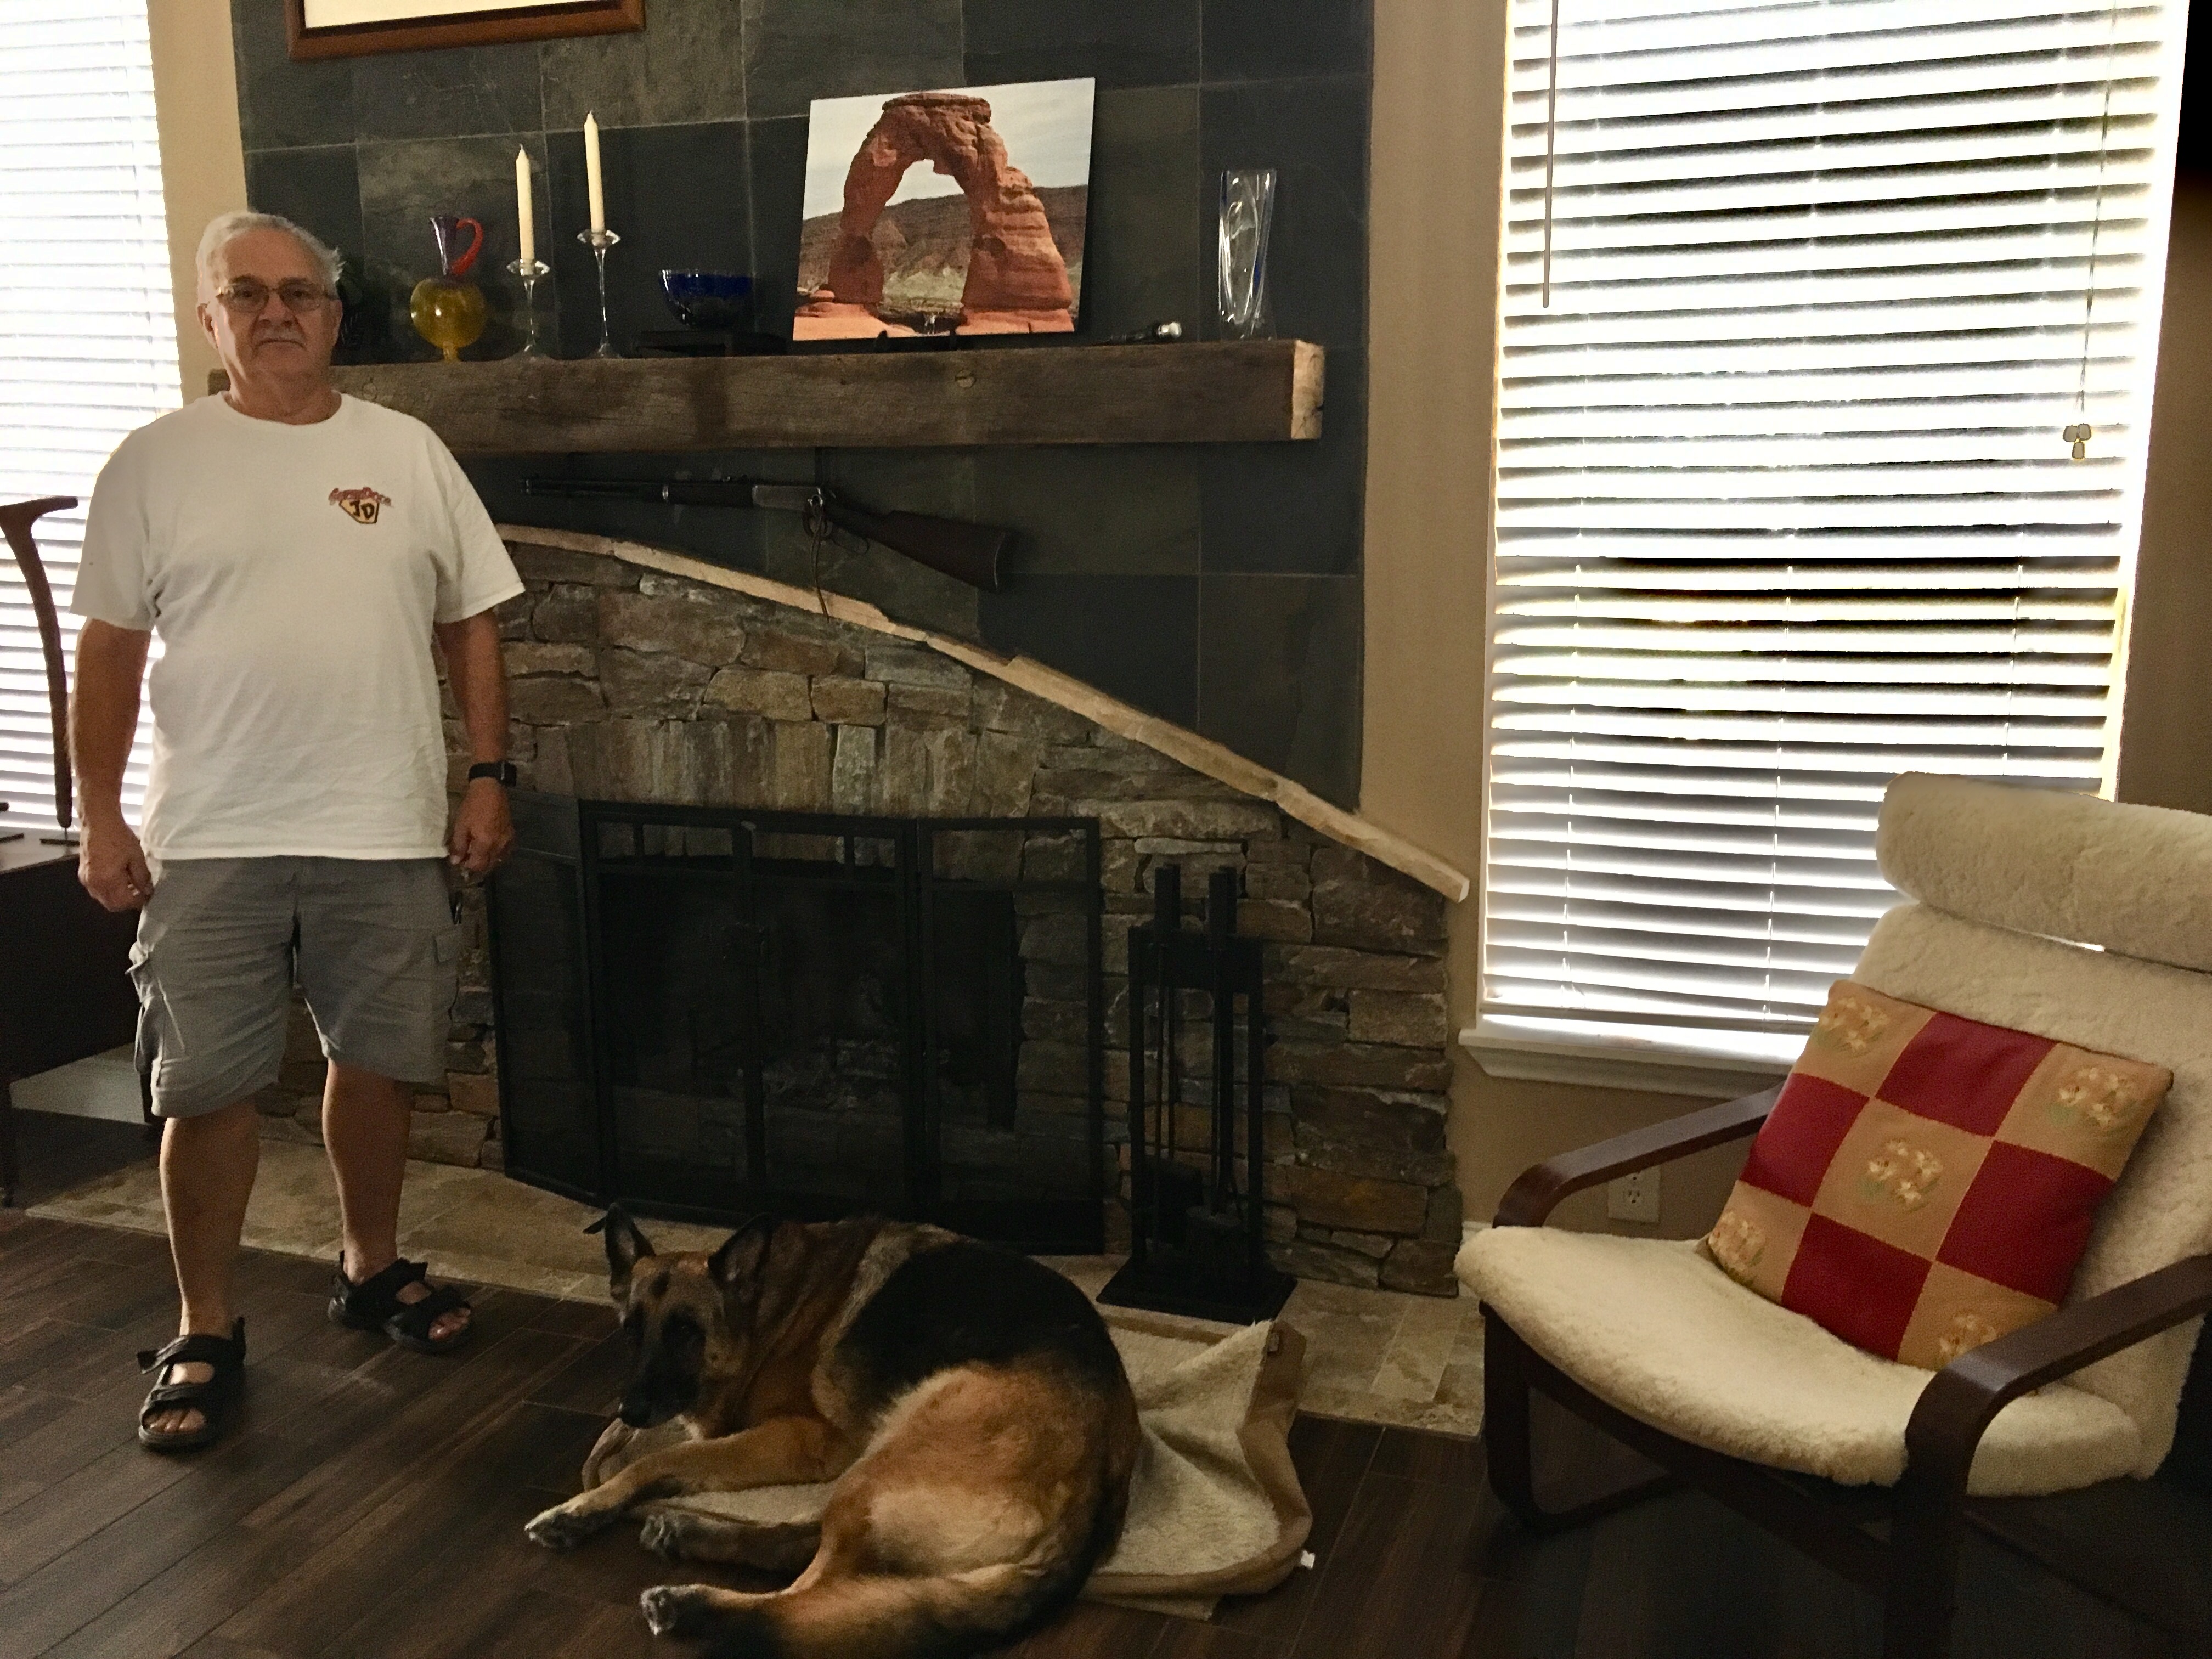 Jim Pongrass and his dog Bailey, pictured in front of the new fireplace he built after Harvey flooded his home.